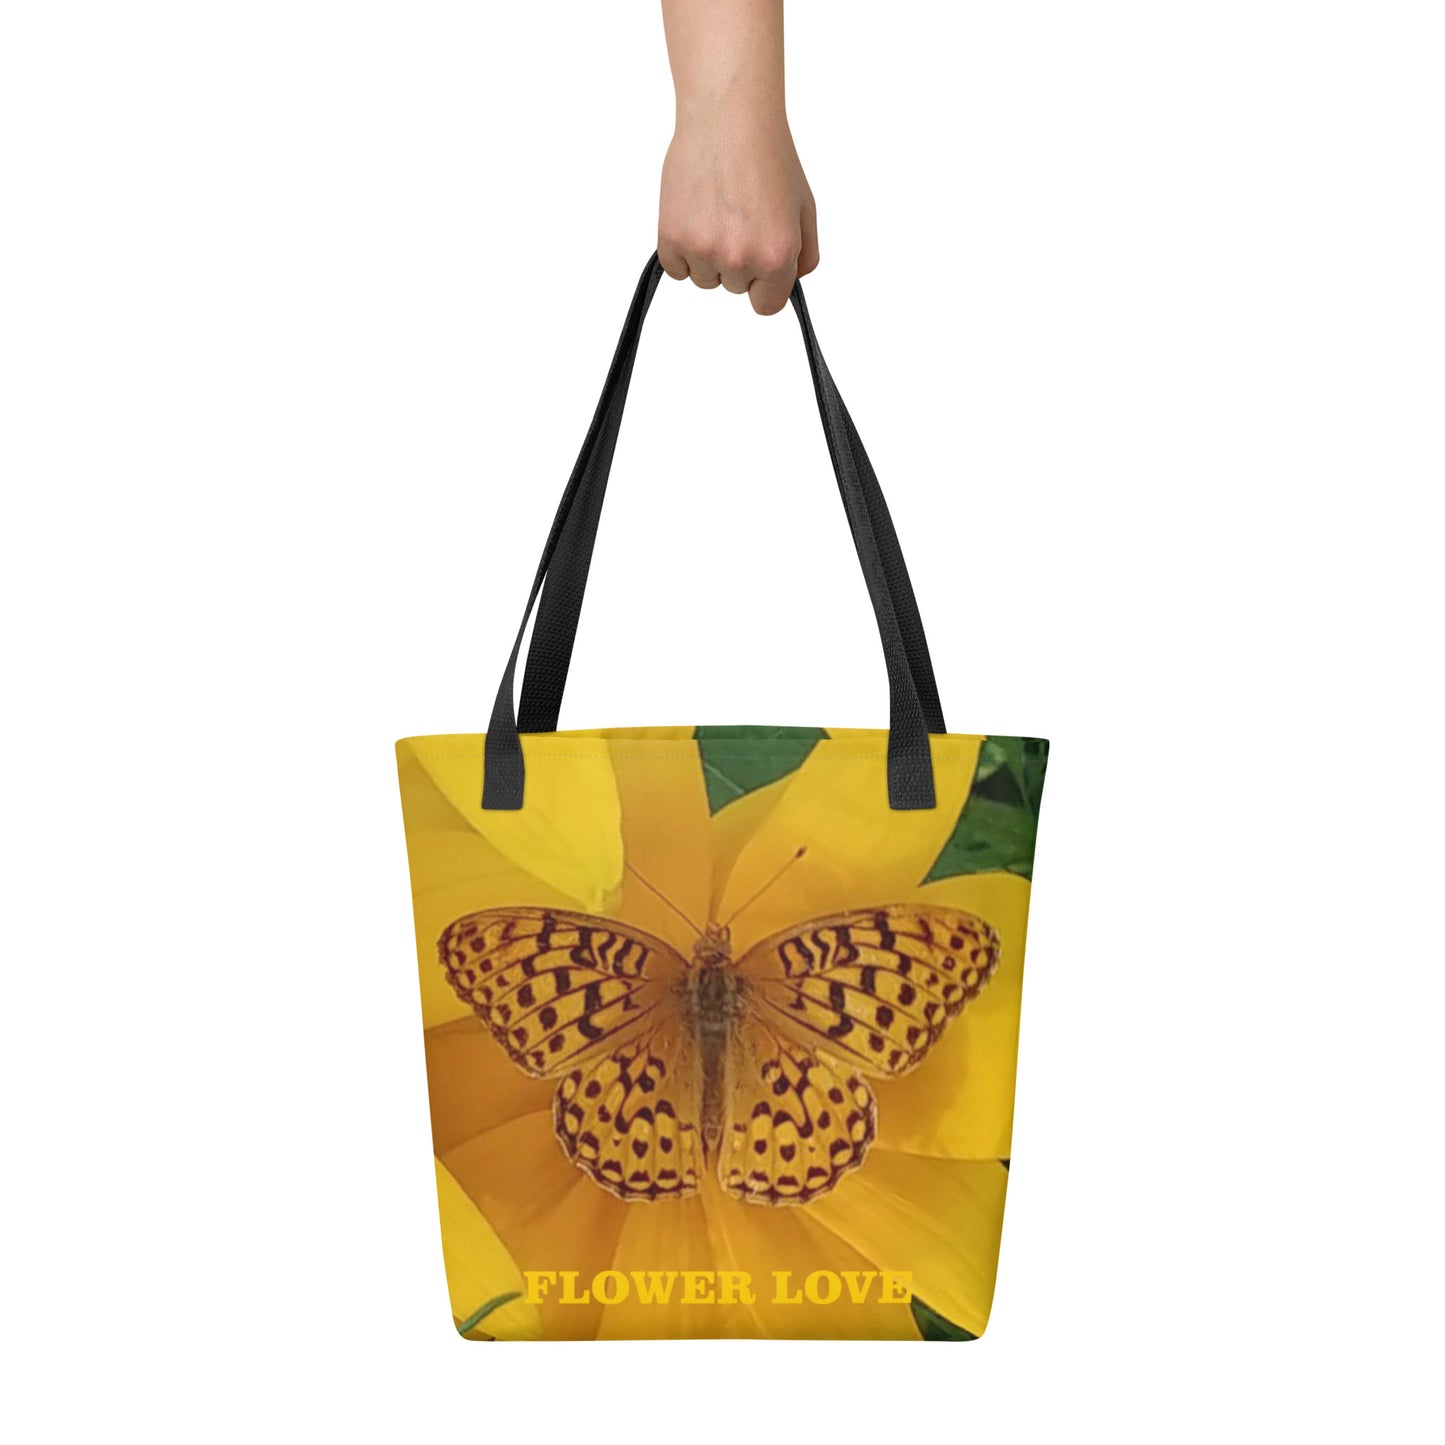 The FLOWER LOVE Collection - "Butterfly Beauty" Design Tote Bag, Beach Bag, Chemo Bag